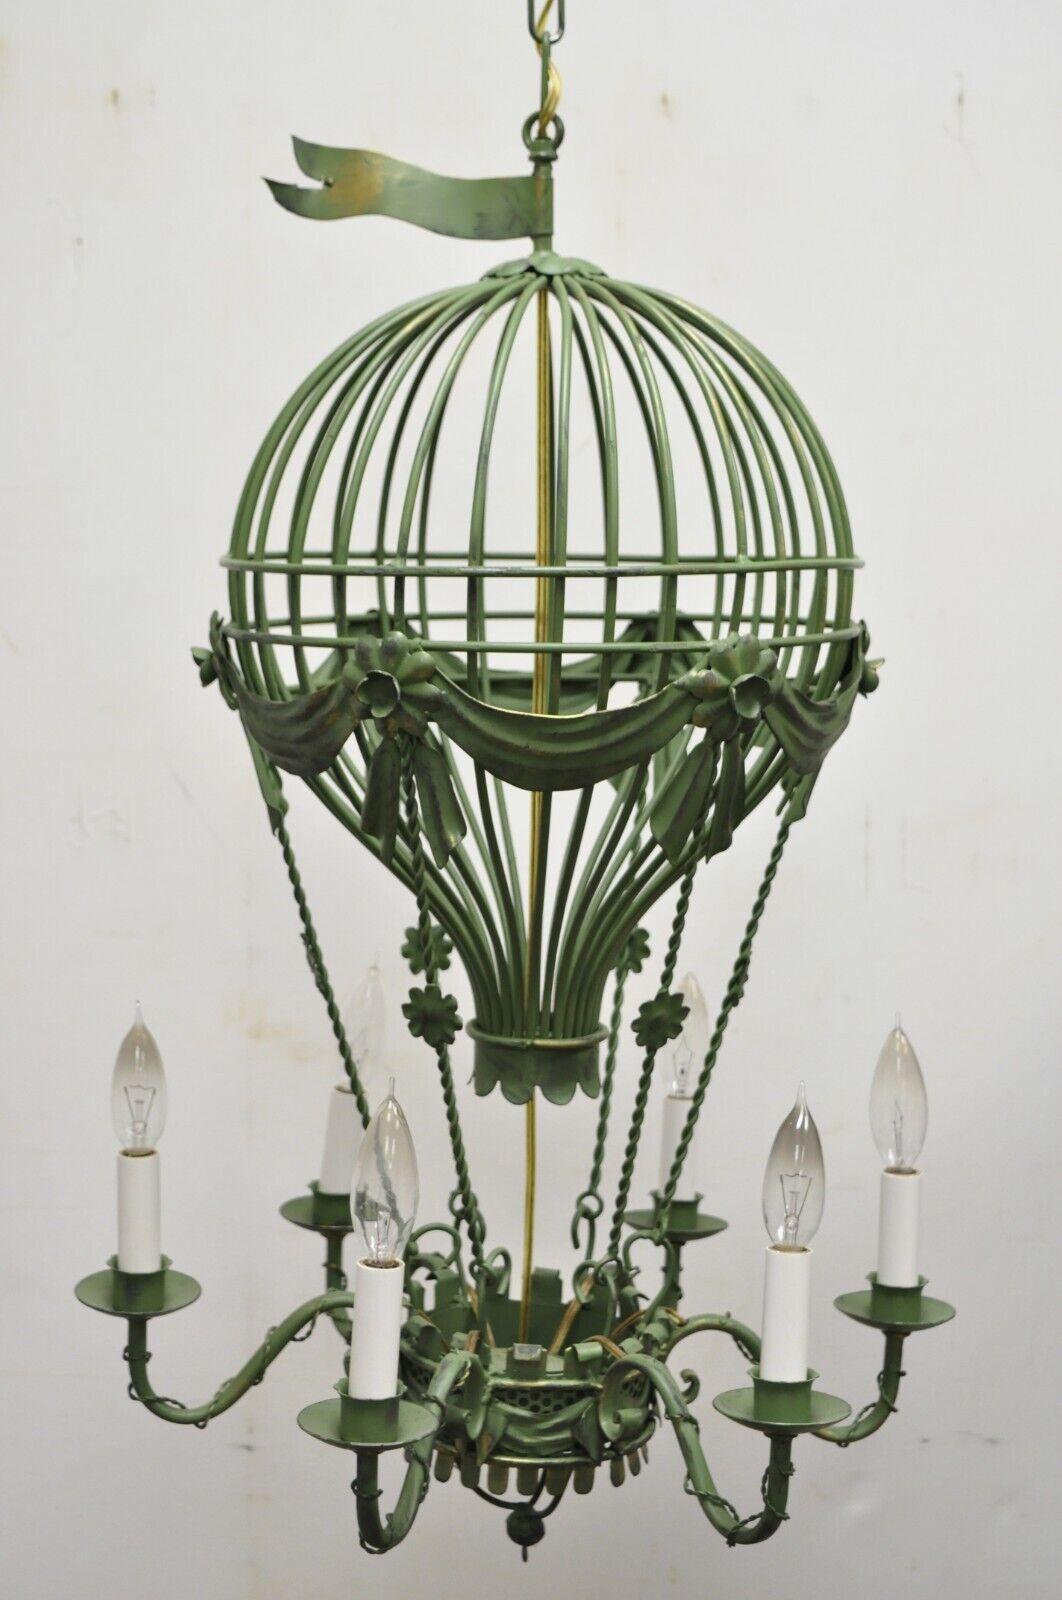 Vintage Hot Air Balloon chandelier green Italian tole metal light fixture. Item features a hot air balloon frame, 6 lights, very nice vintage item, great style and form. Circa late 20th century. Measurements: 31